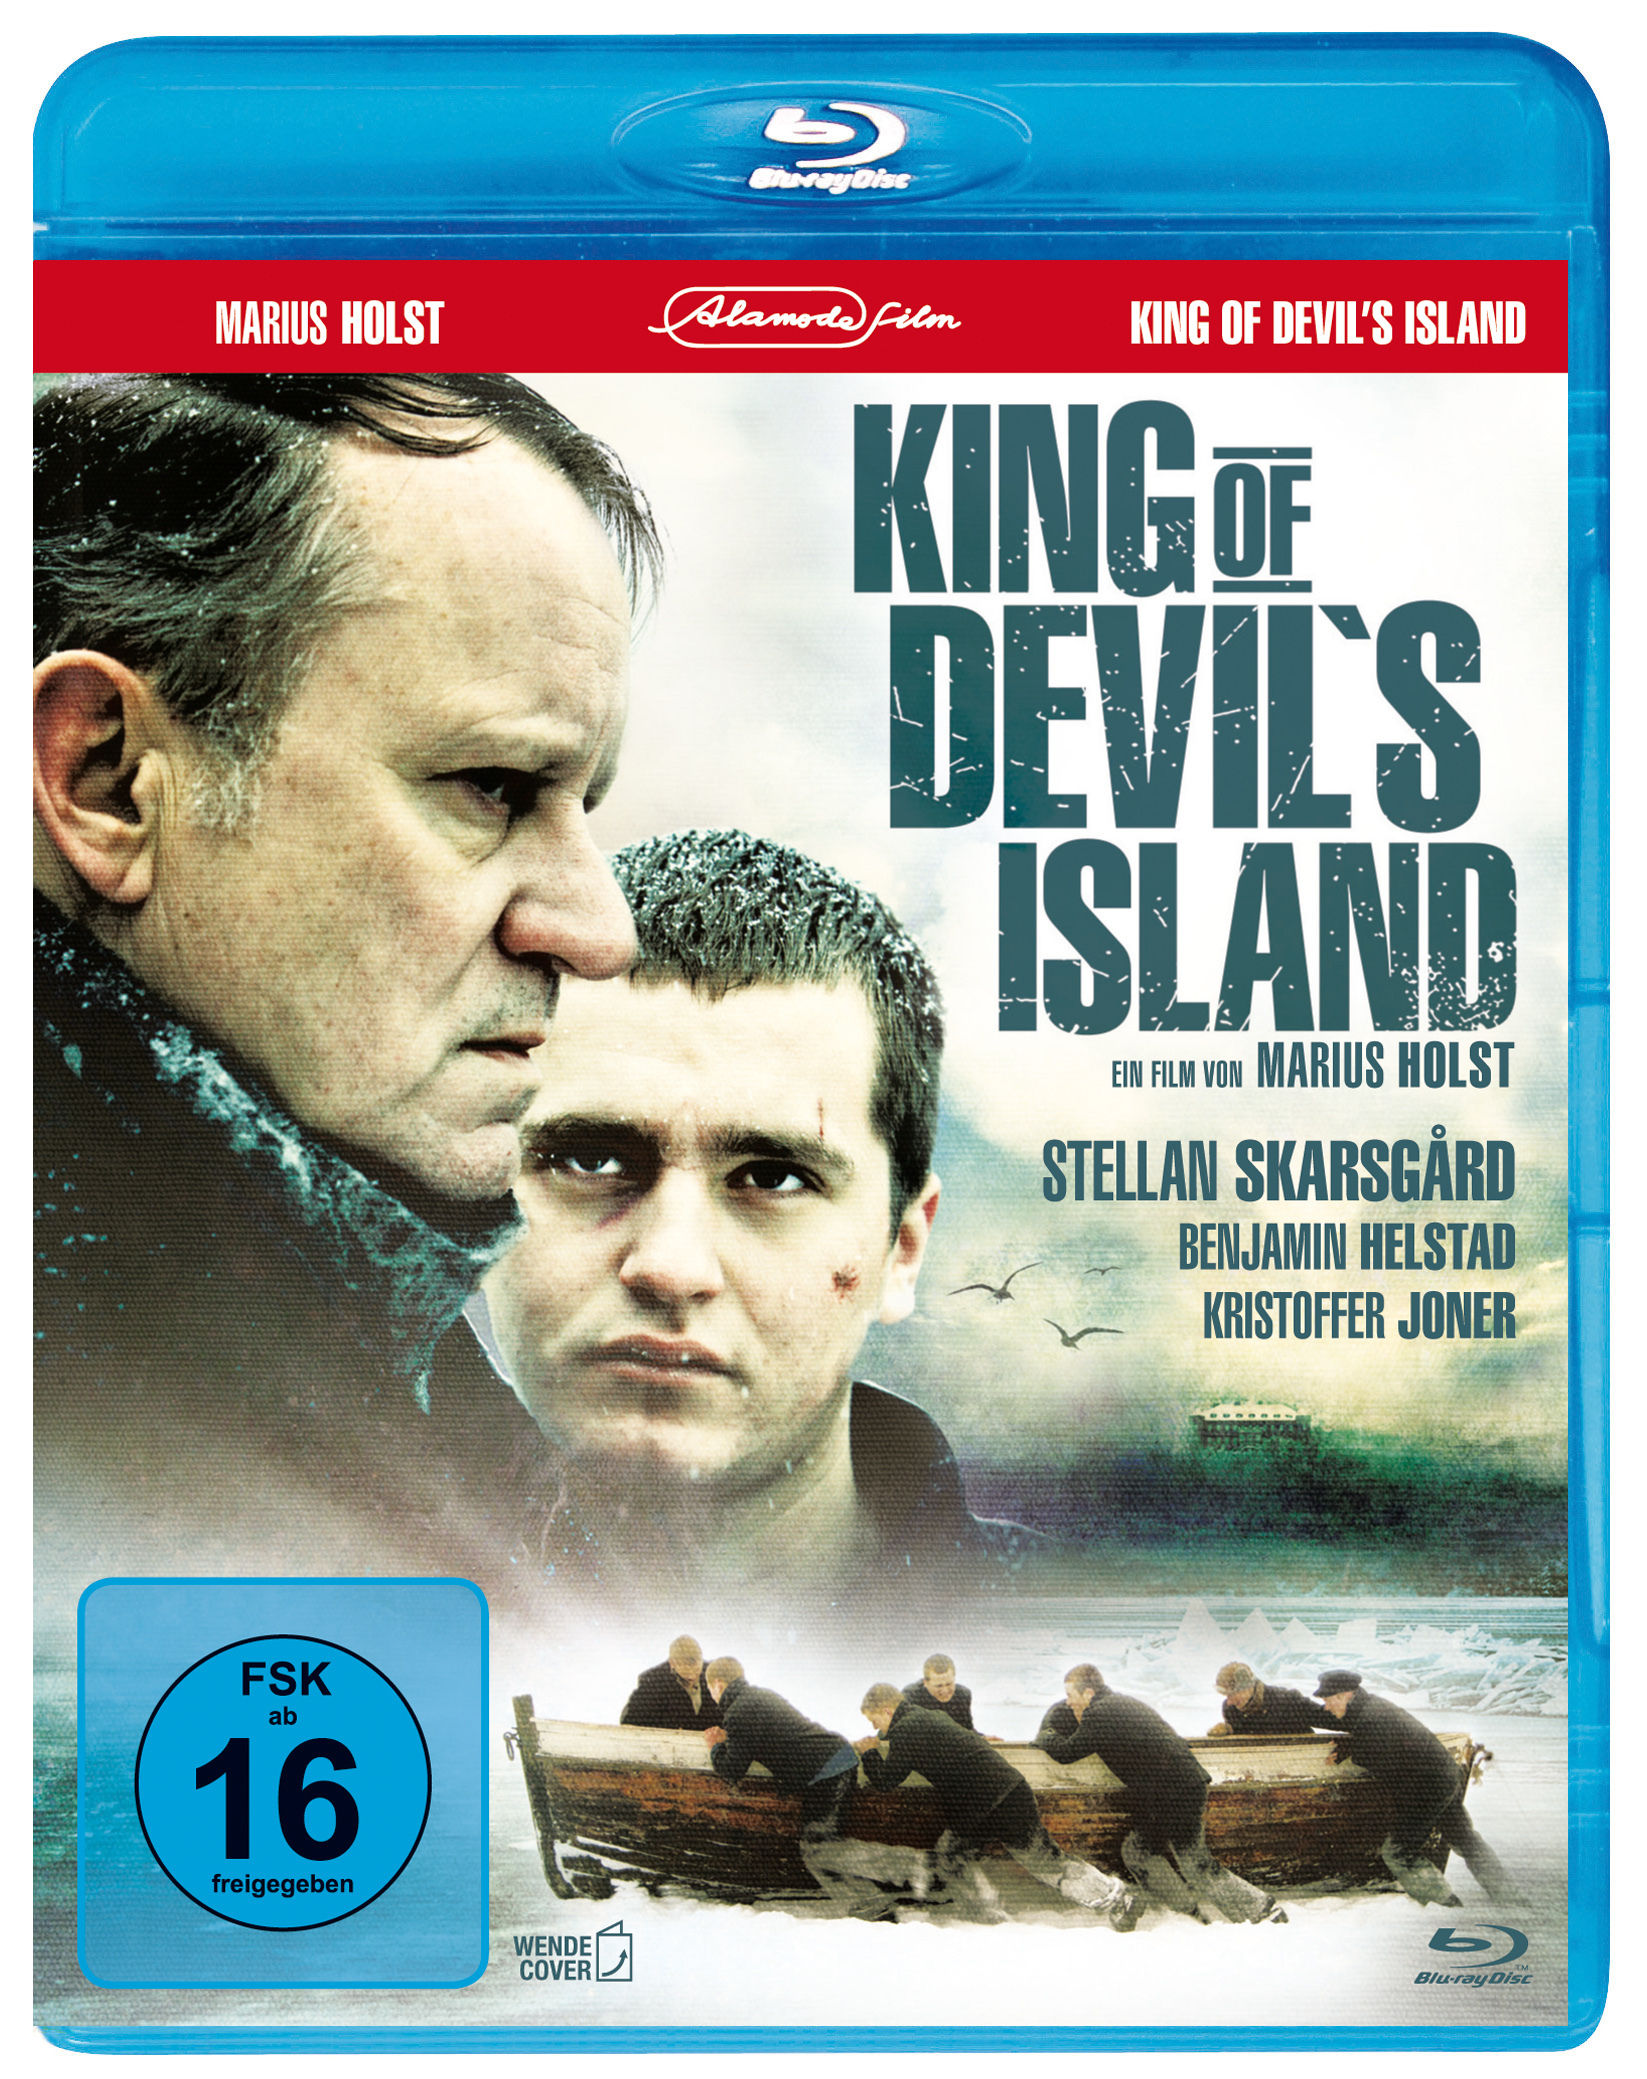 Image of King of Devil's Island